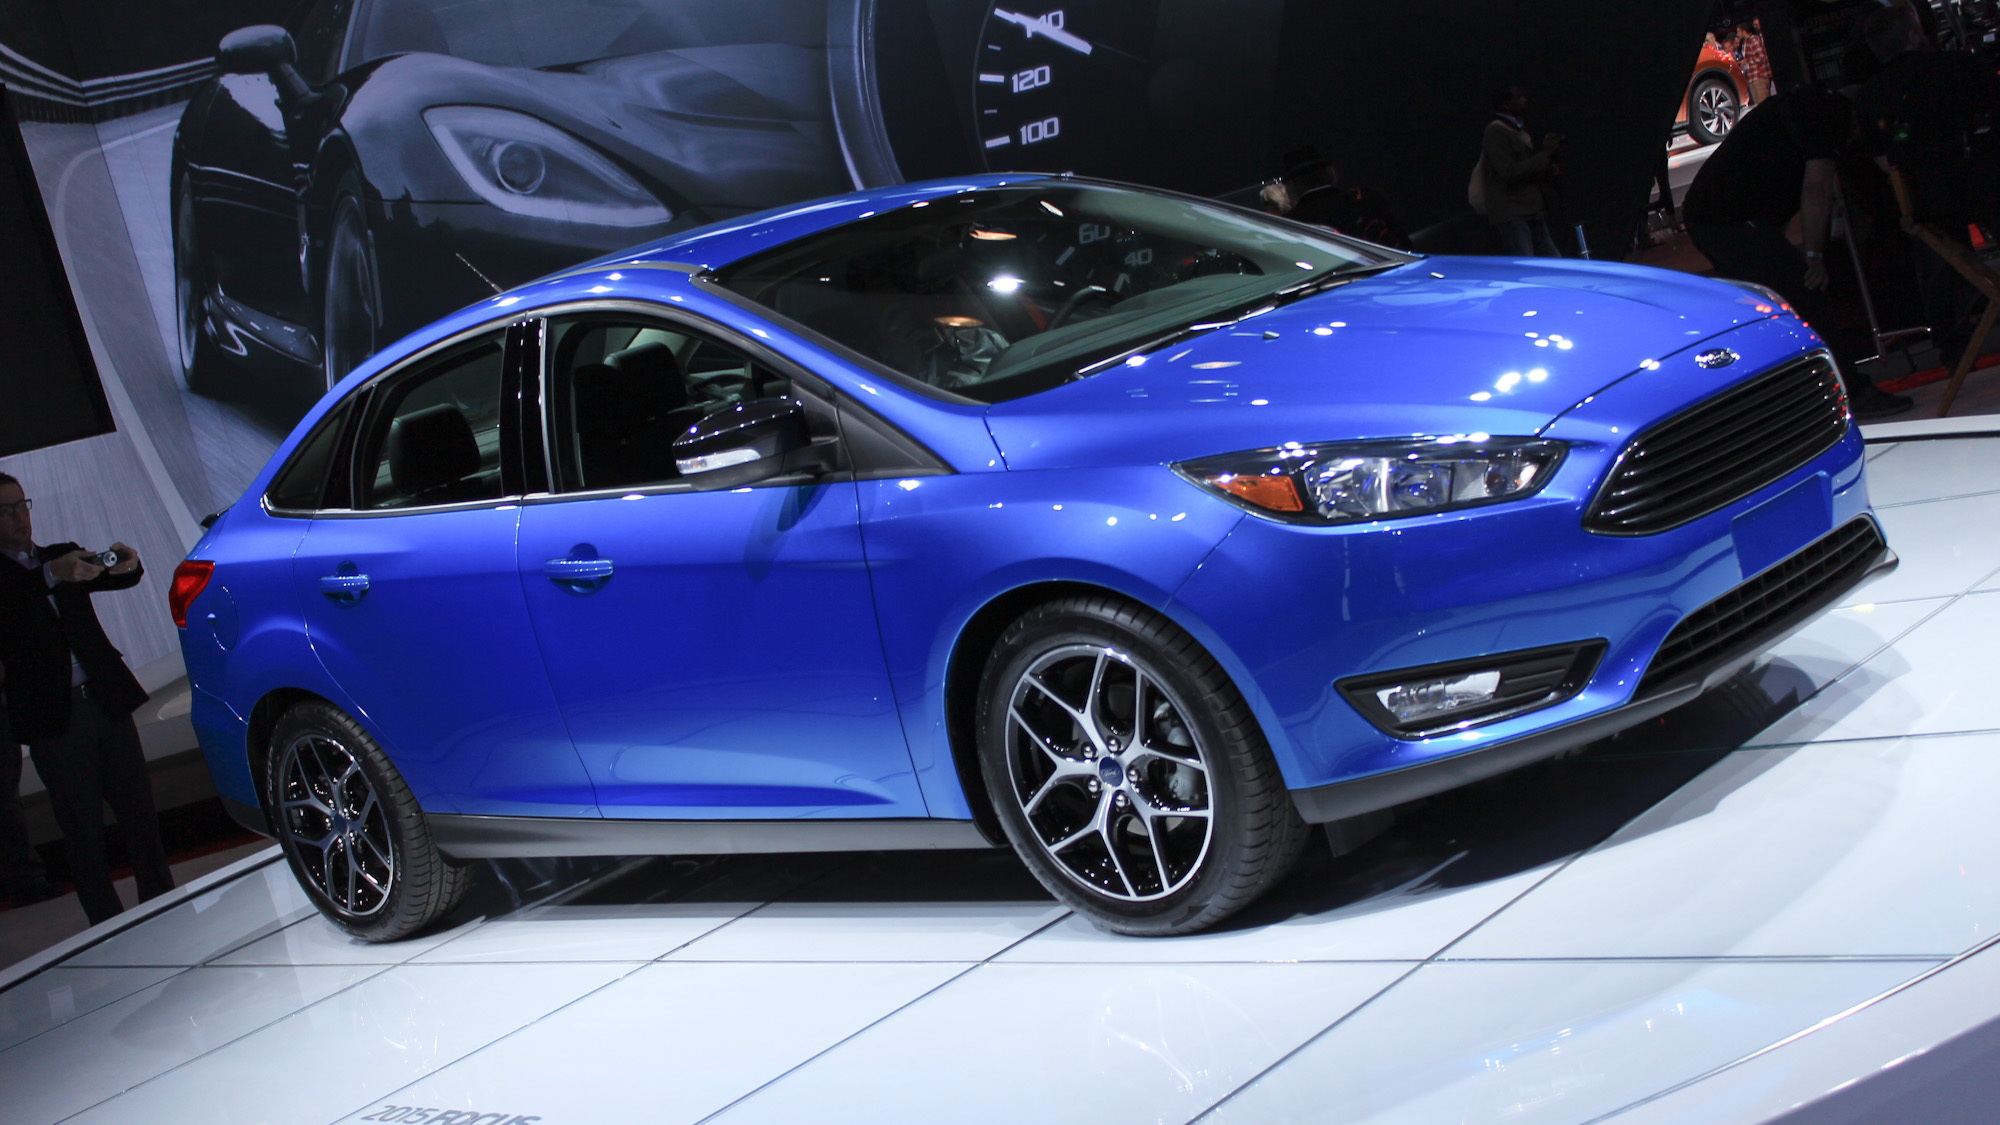 2015 Ford Focus, 2014 New York Auto Show